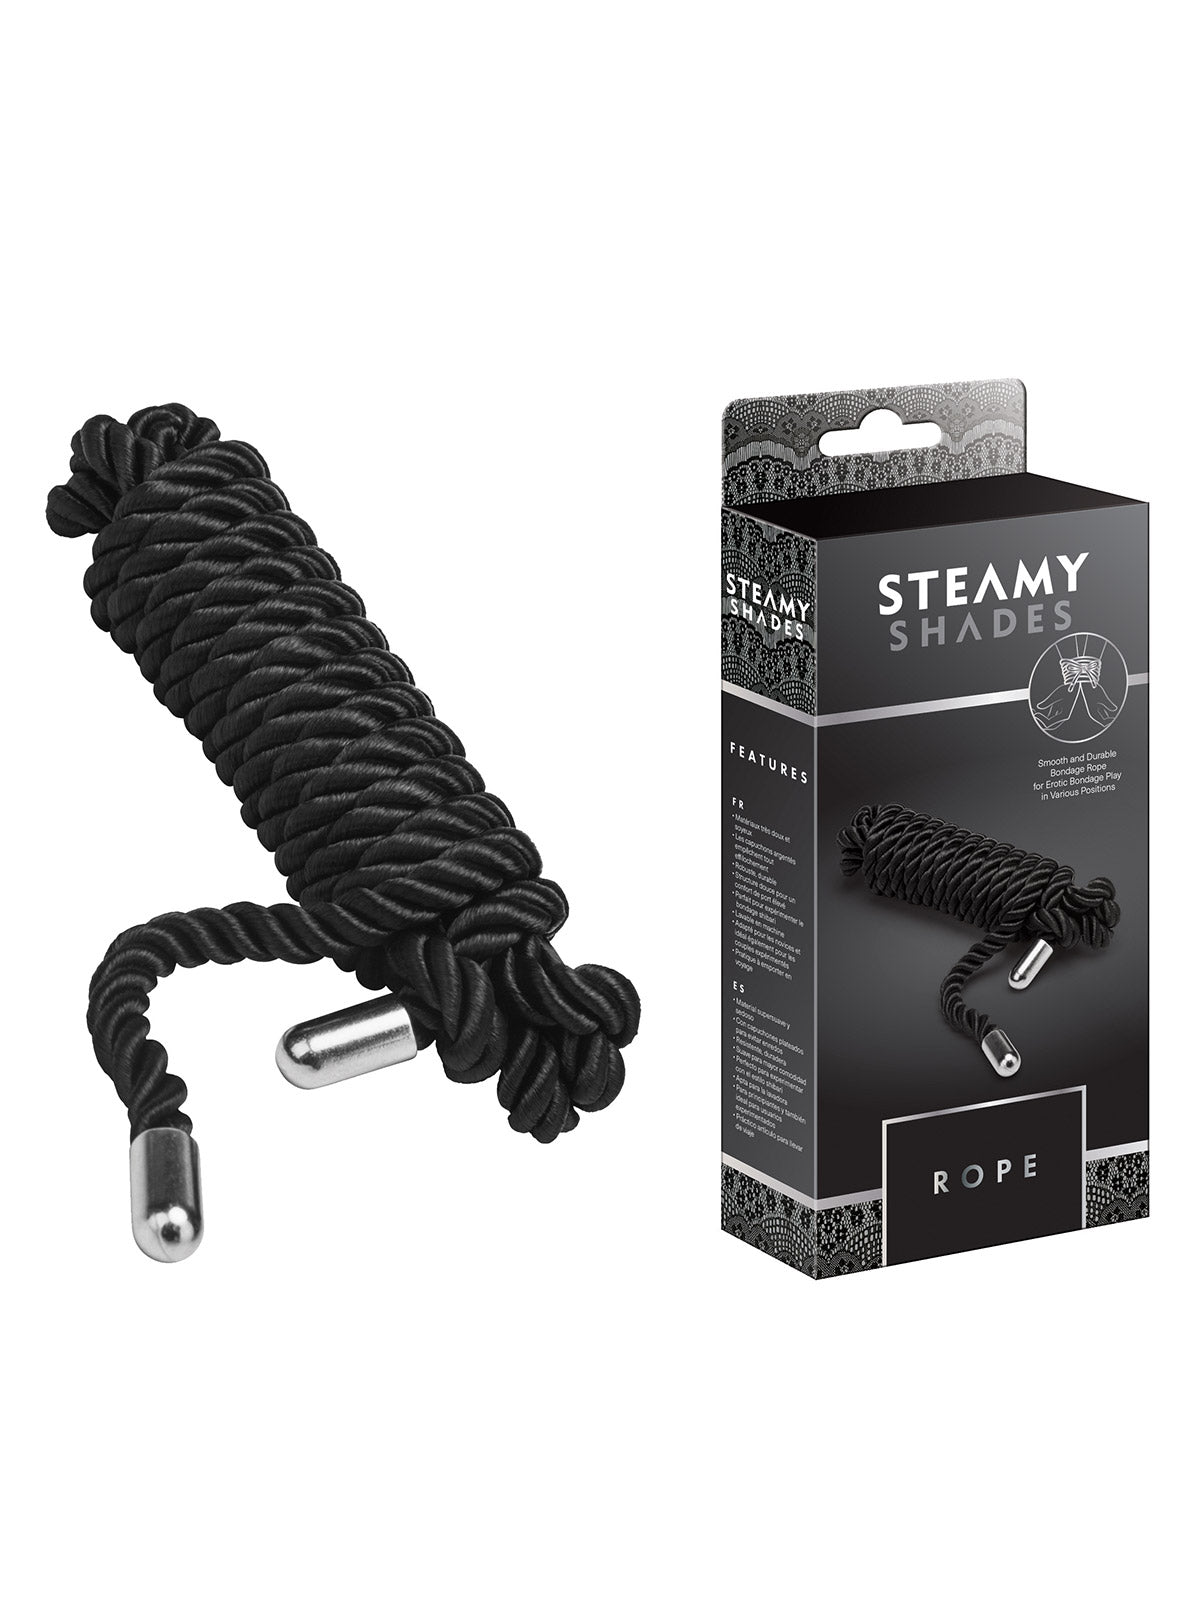 2m Black Rope  by Steamy Shades